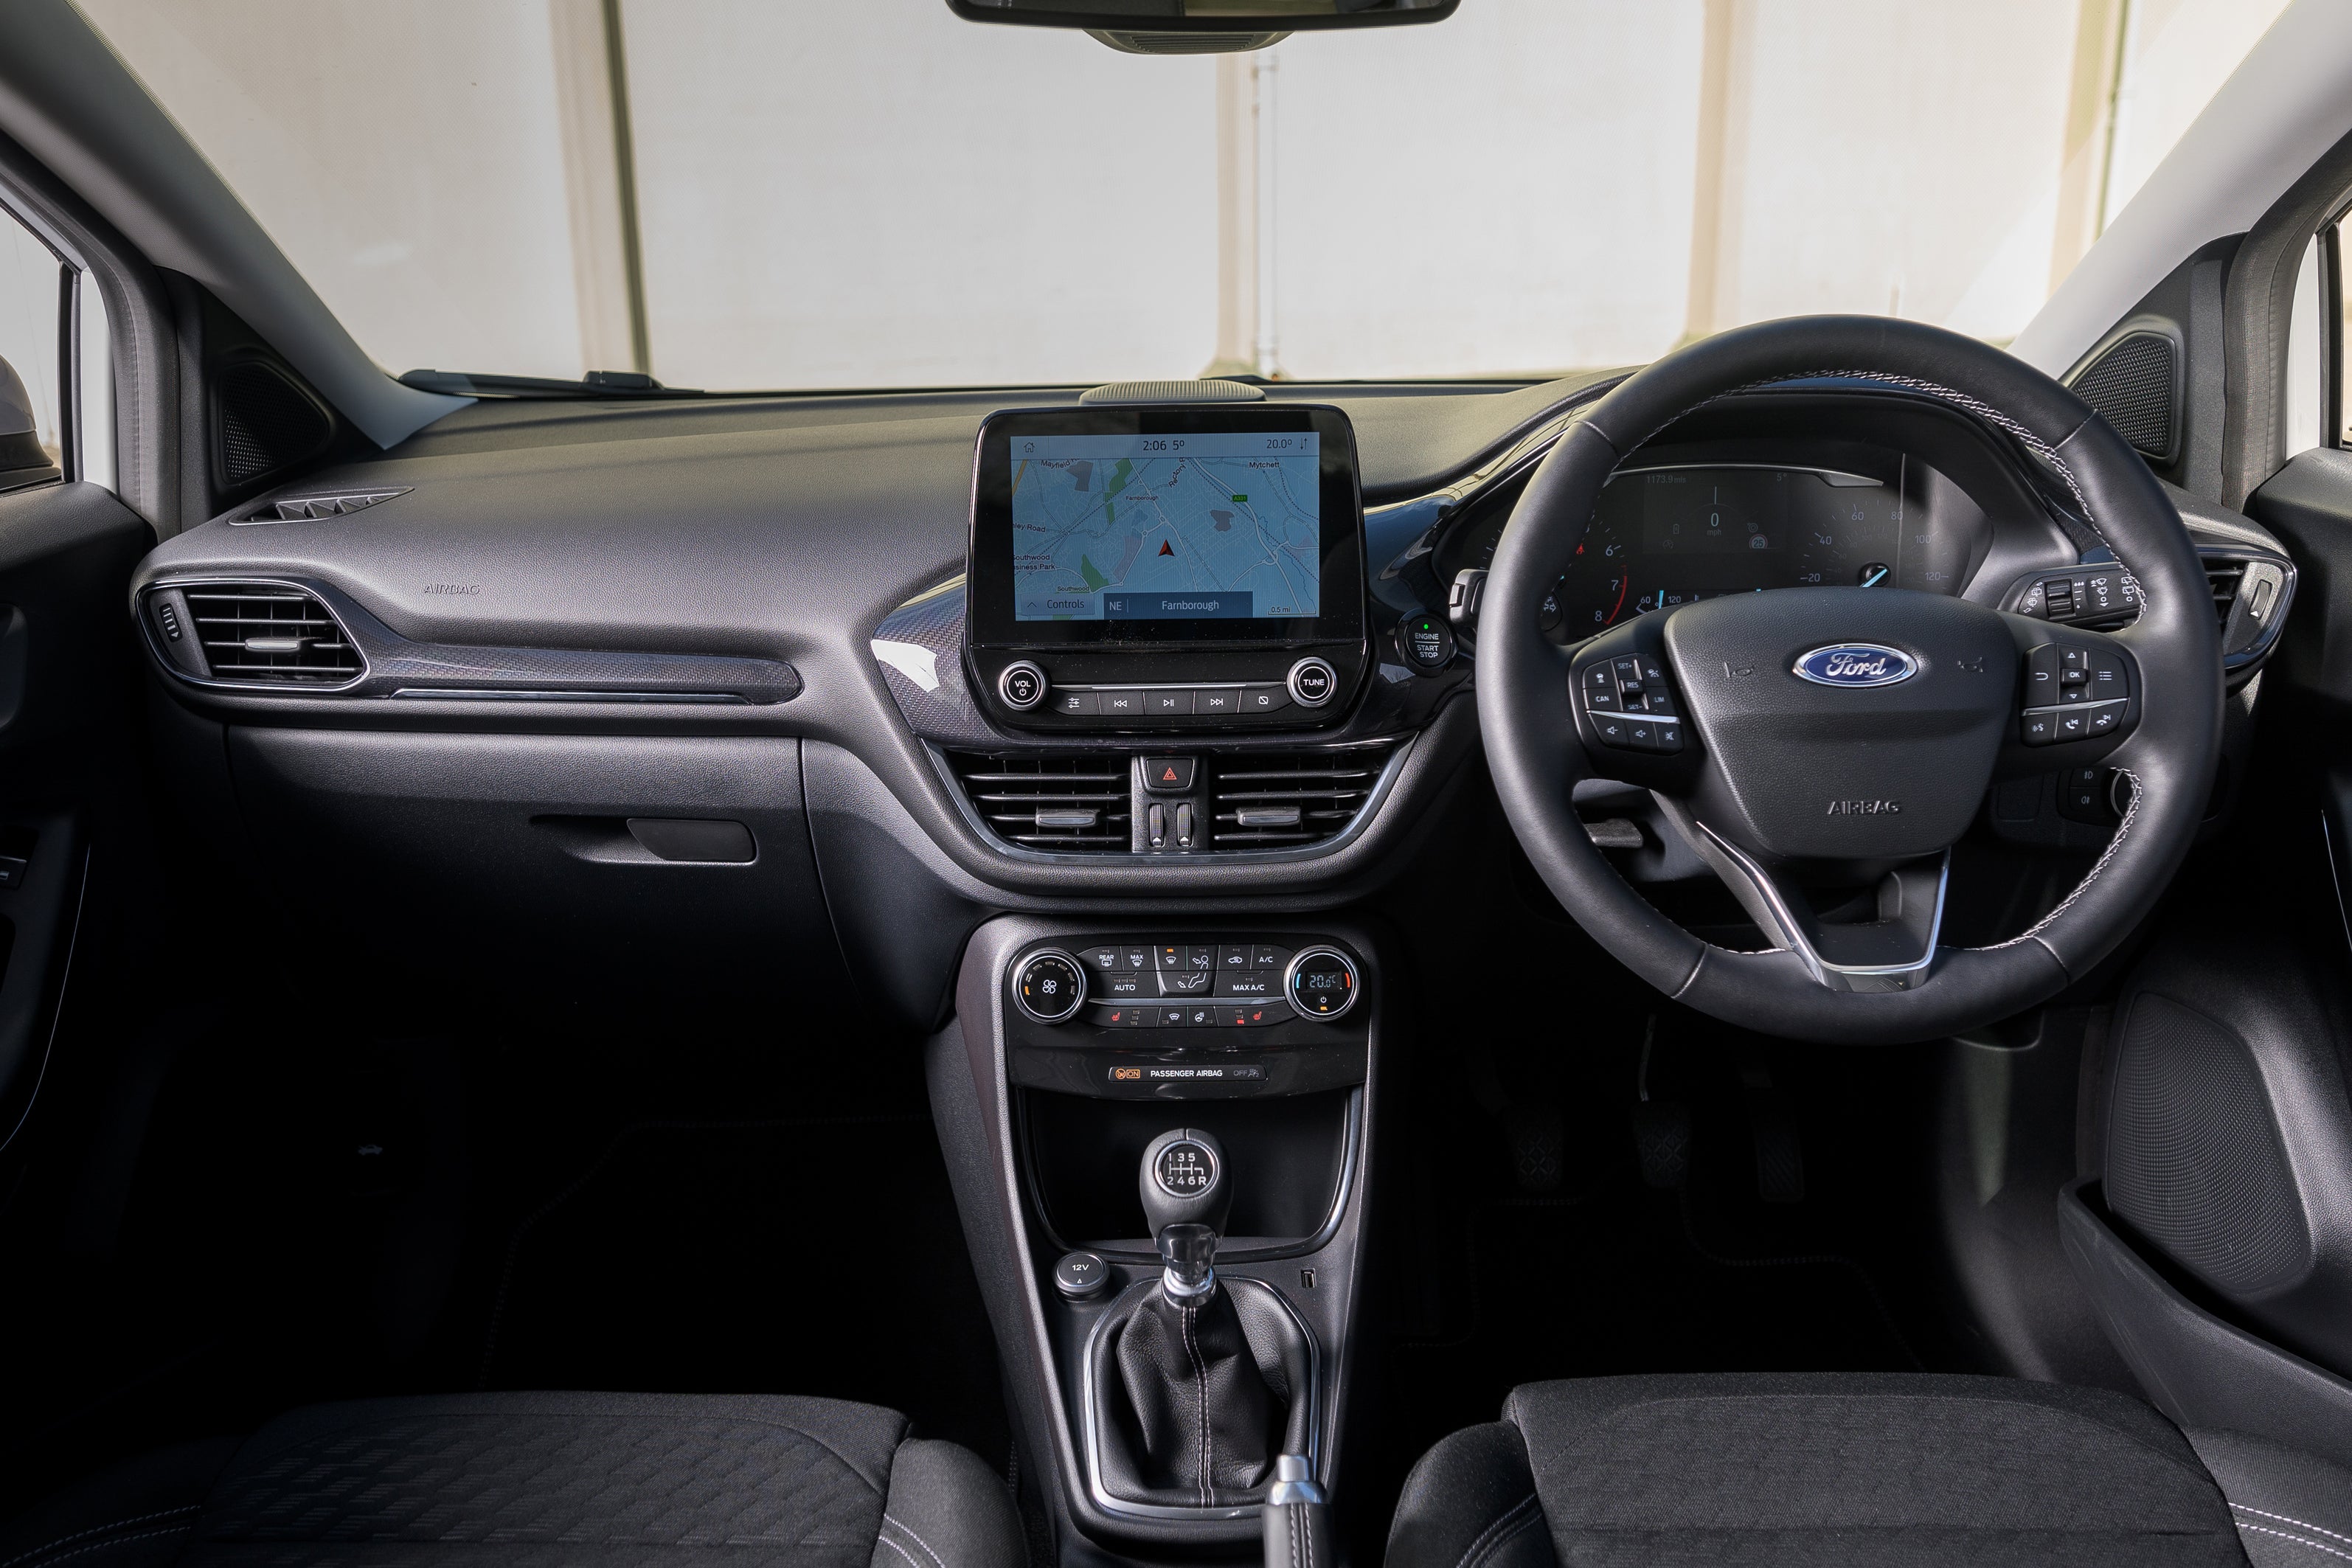 Ford Puma Review 2022: Interior and dashboard layout